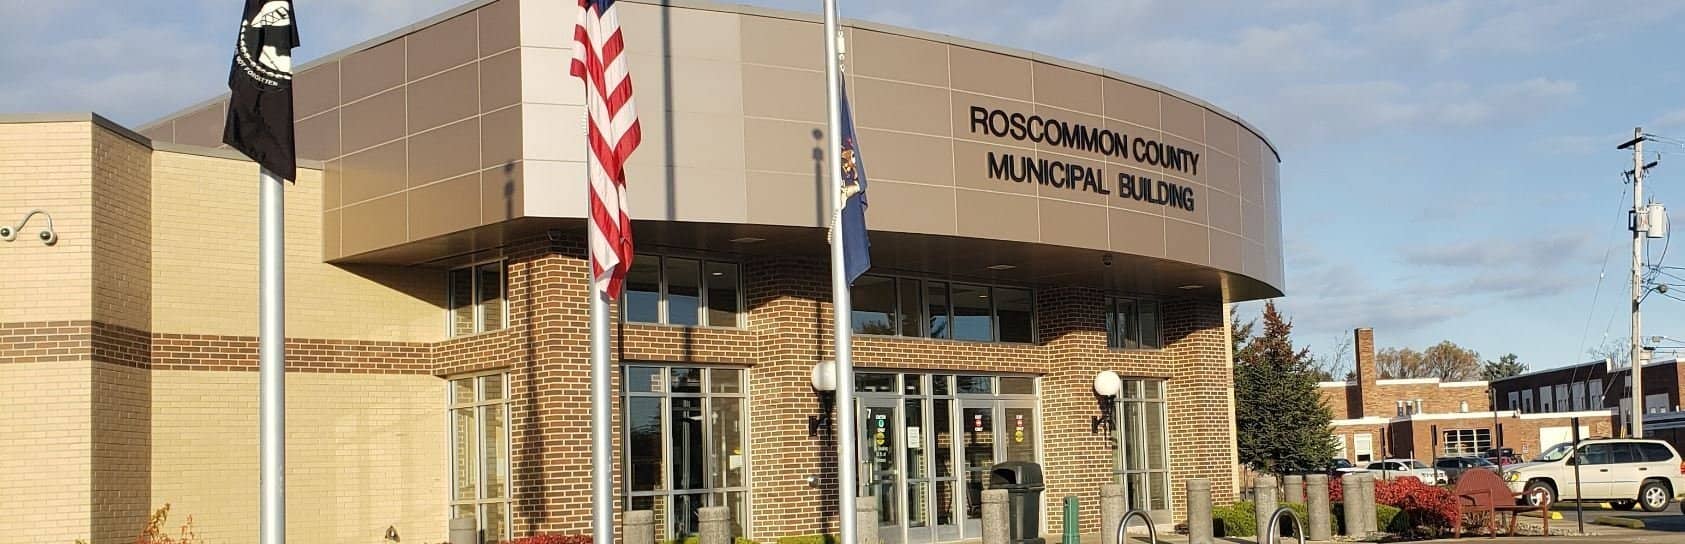 Image of Roscommon County Equalization Department